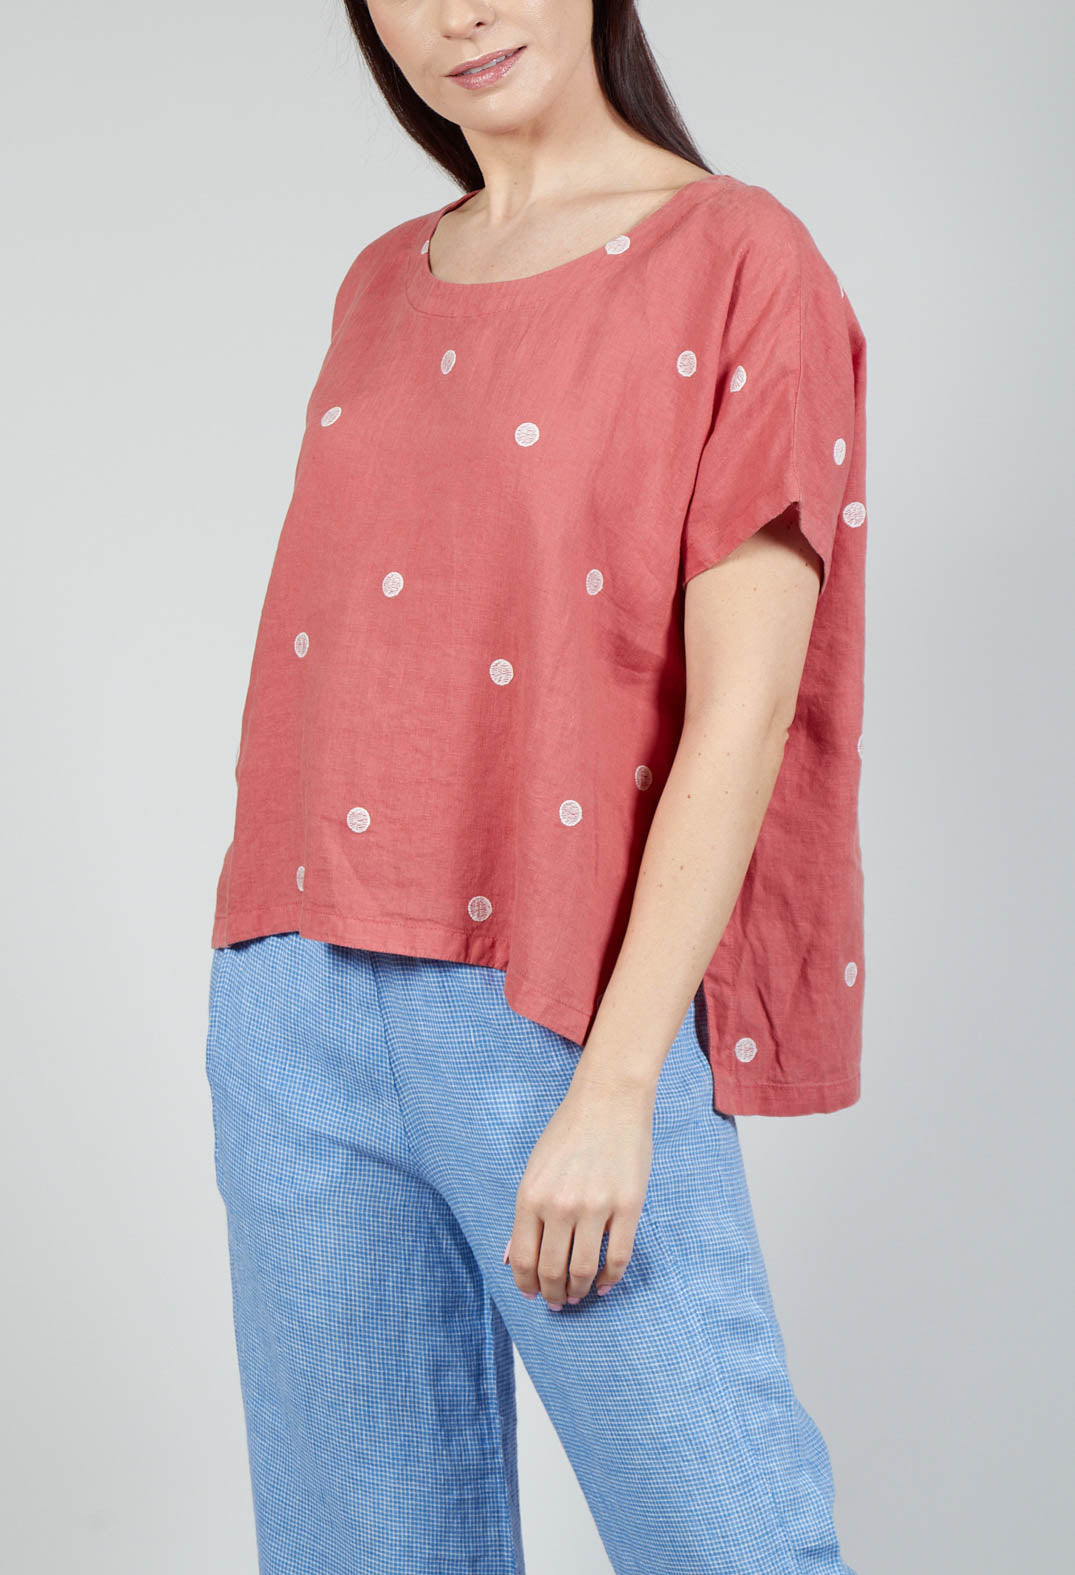 Relaxed Top in Terracotta